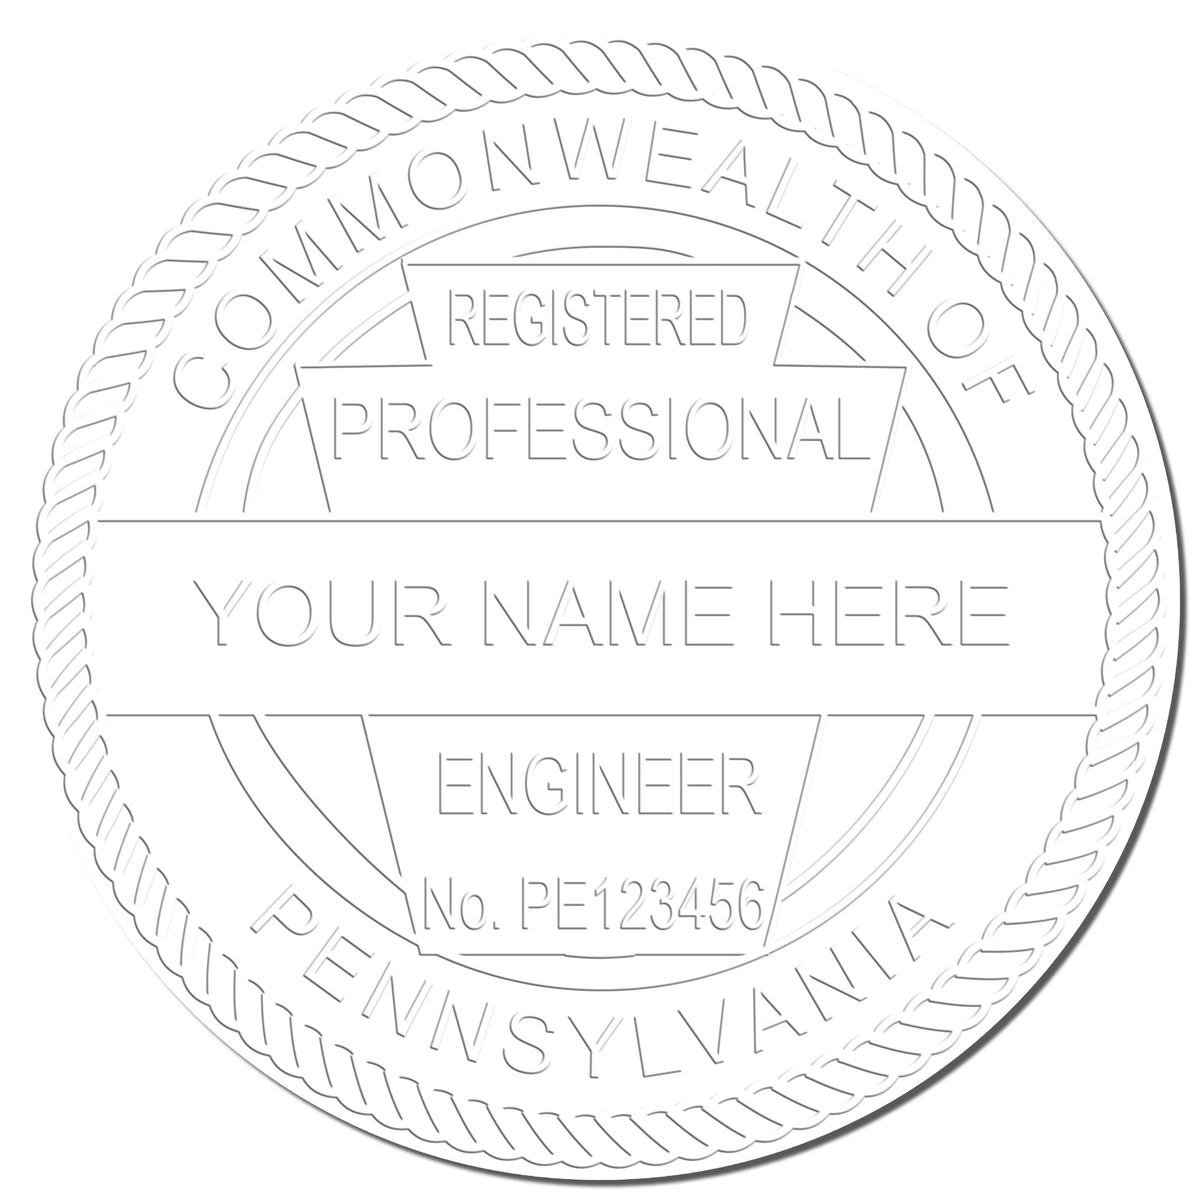 This paper is stamped with a sample imprint of the Hybrid Pennsylvania Engineer Seal, signifying its quality and reliability.